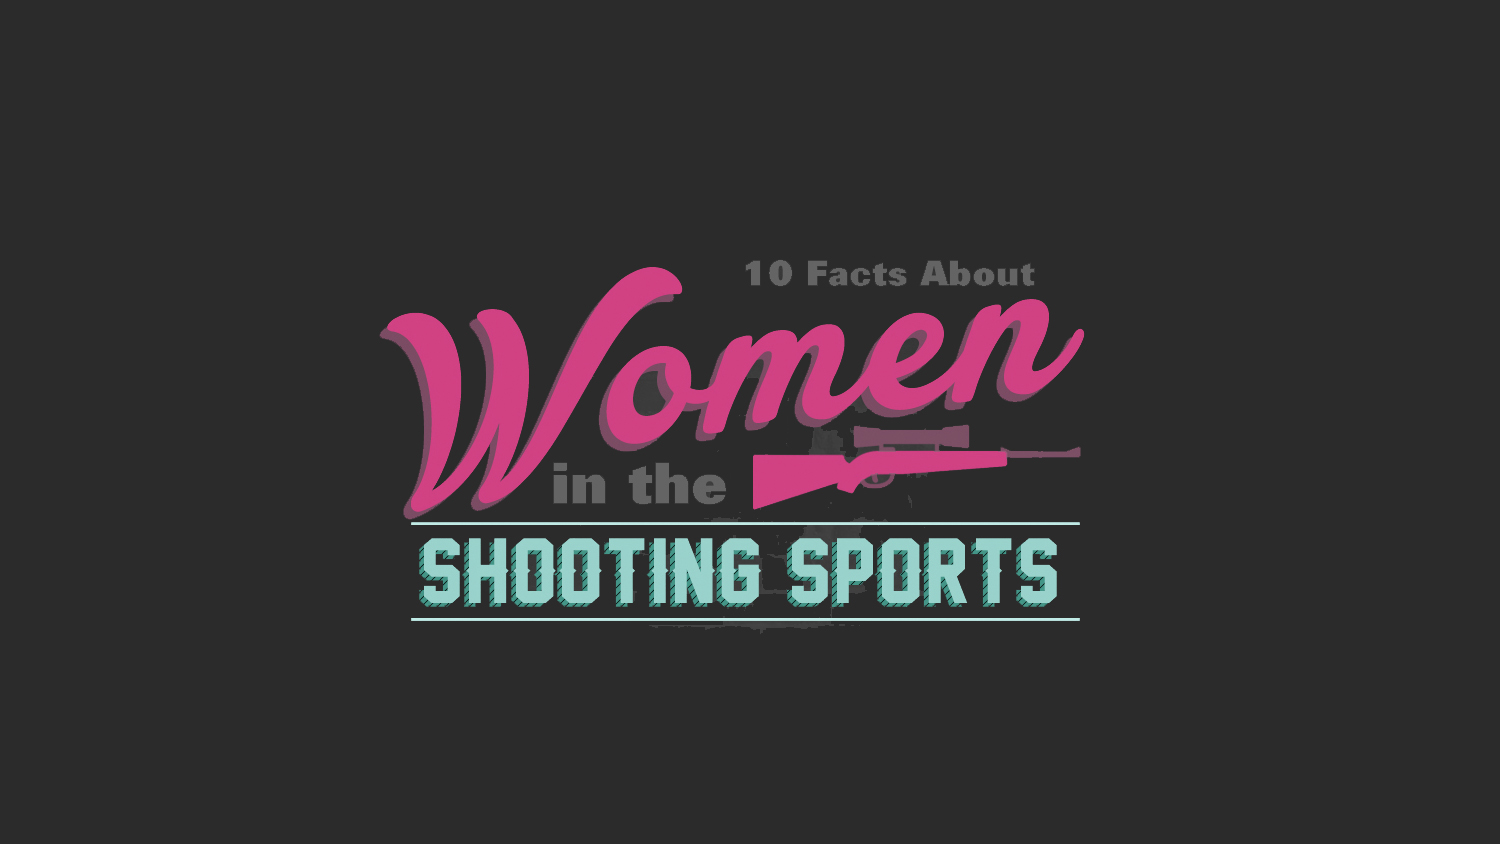 INFOGRAPHIC: 10 Facts About Women in the Shooting Sports